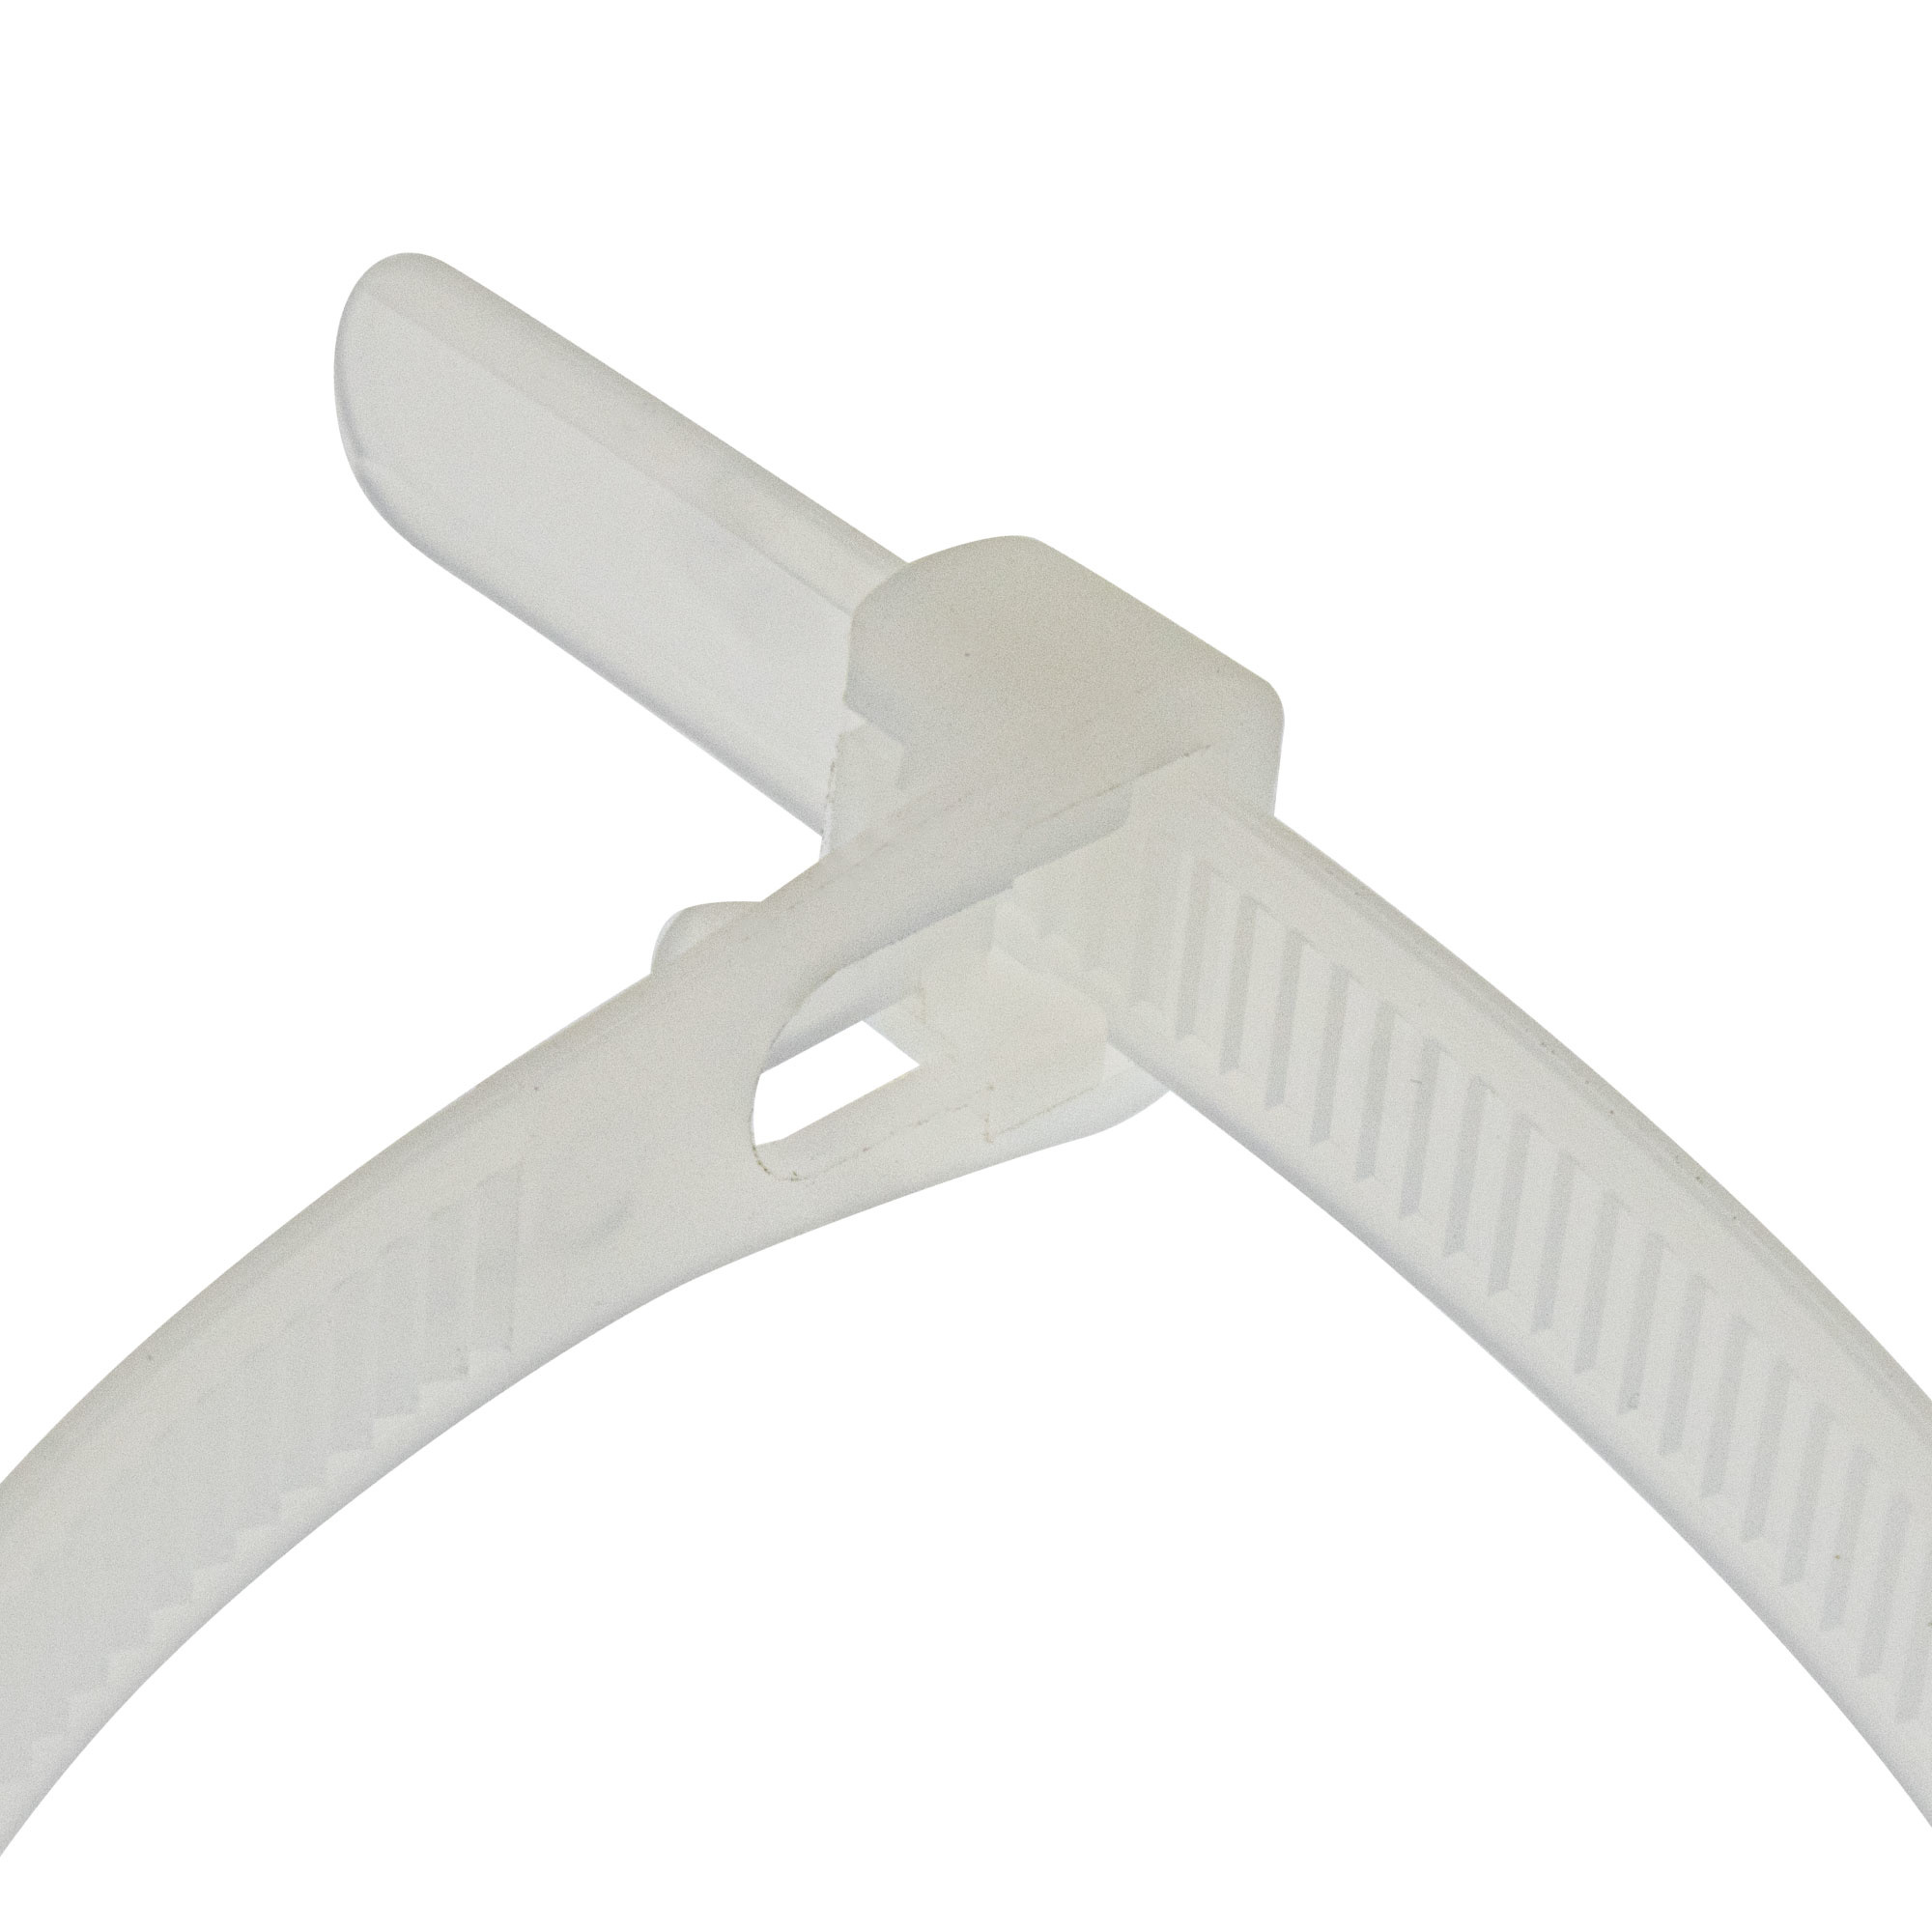 Cable tie re-use-able 300 x 4,8mm, white, 100PCS